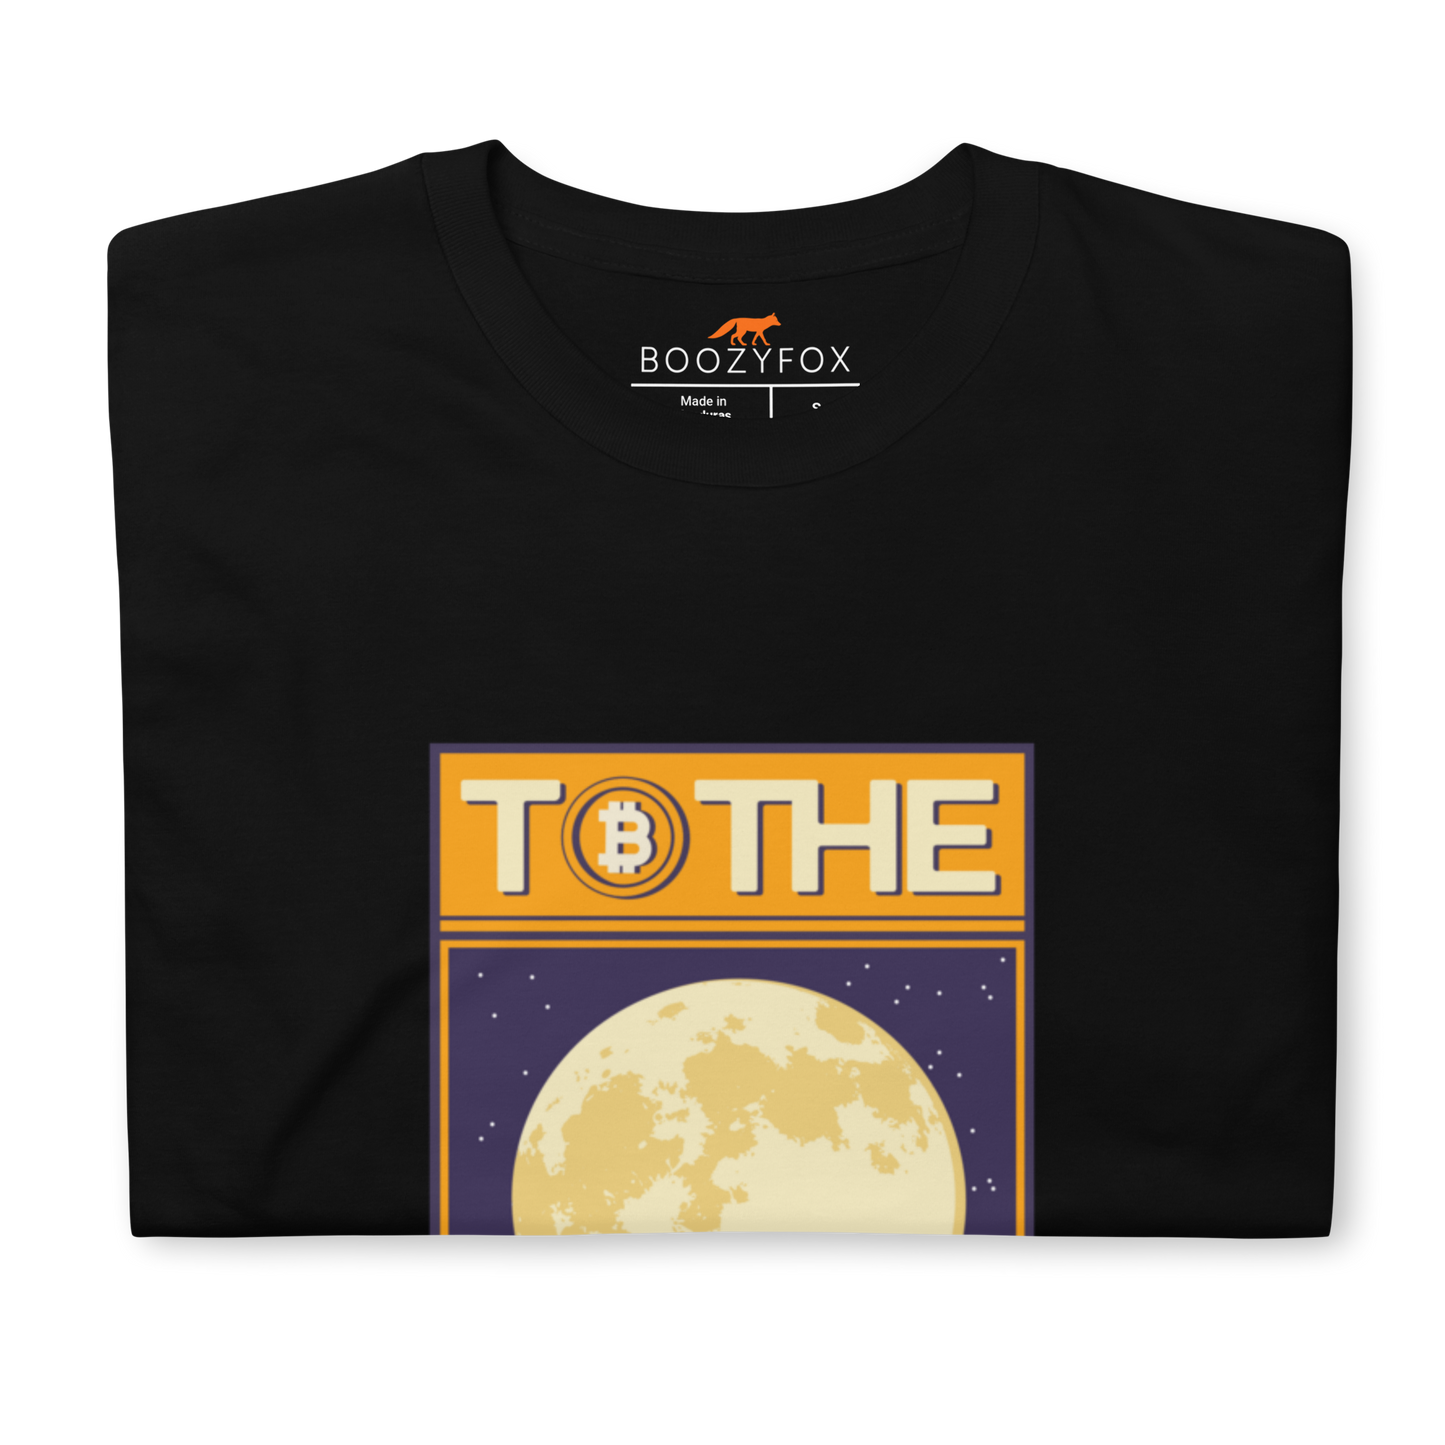 Front details of a Black Bitcoin T-Shirt featuring a funny To The Moon graphic on the chest - Cool Graphic Bitcoin T-Shirts - Boozy Fox